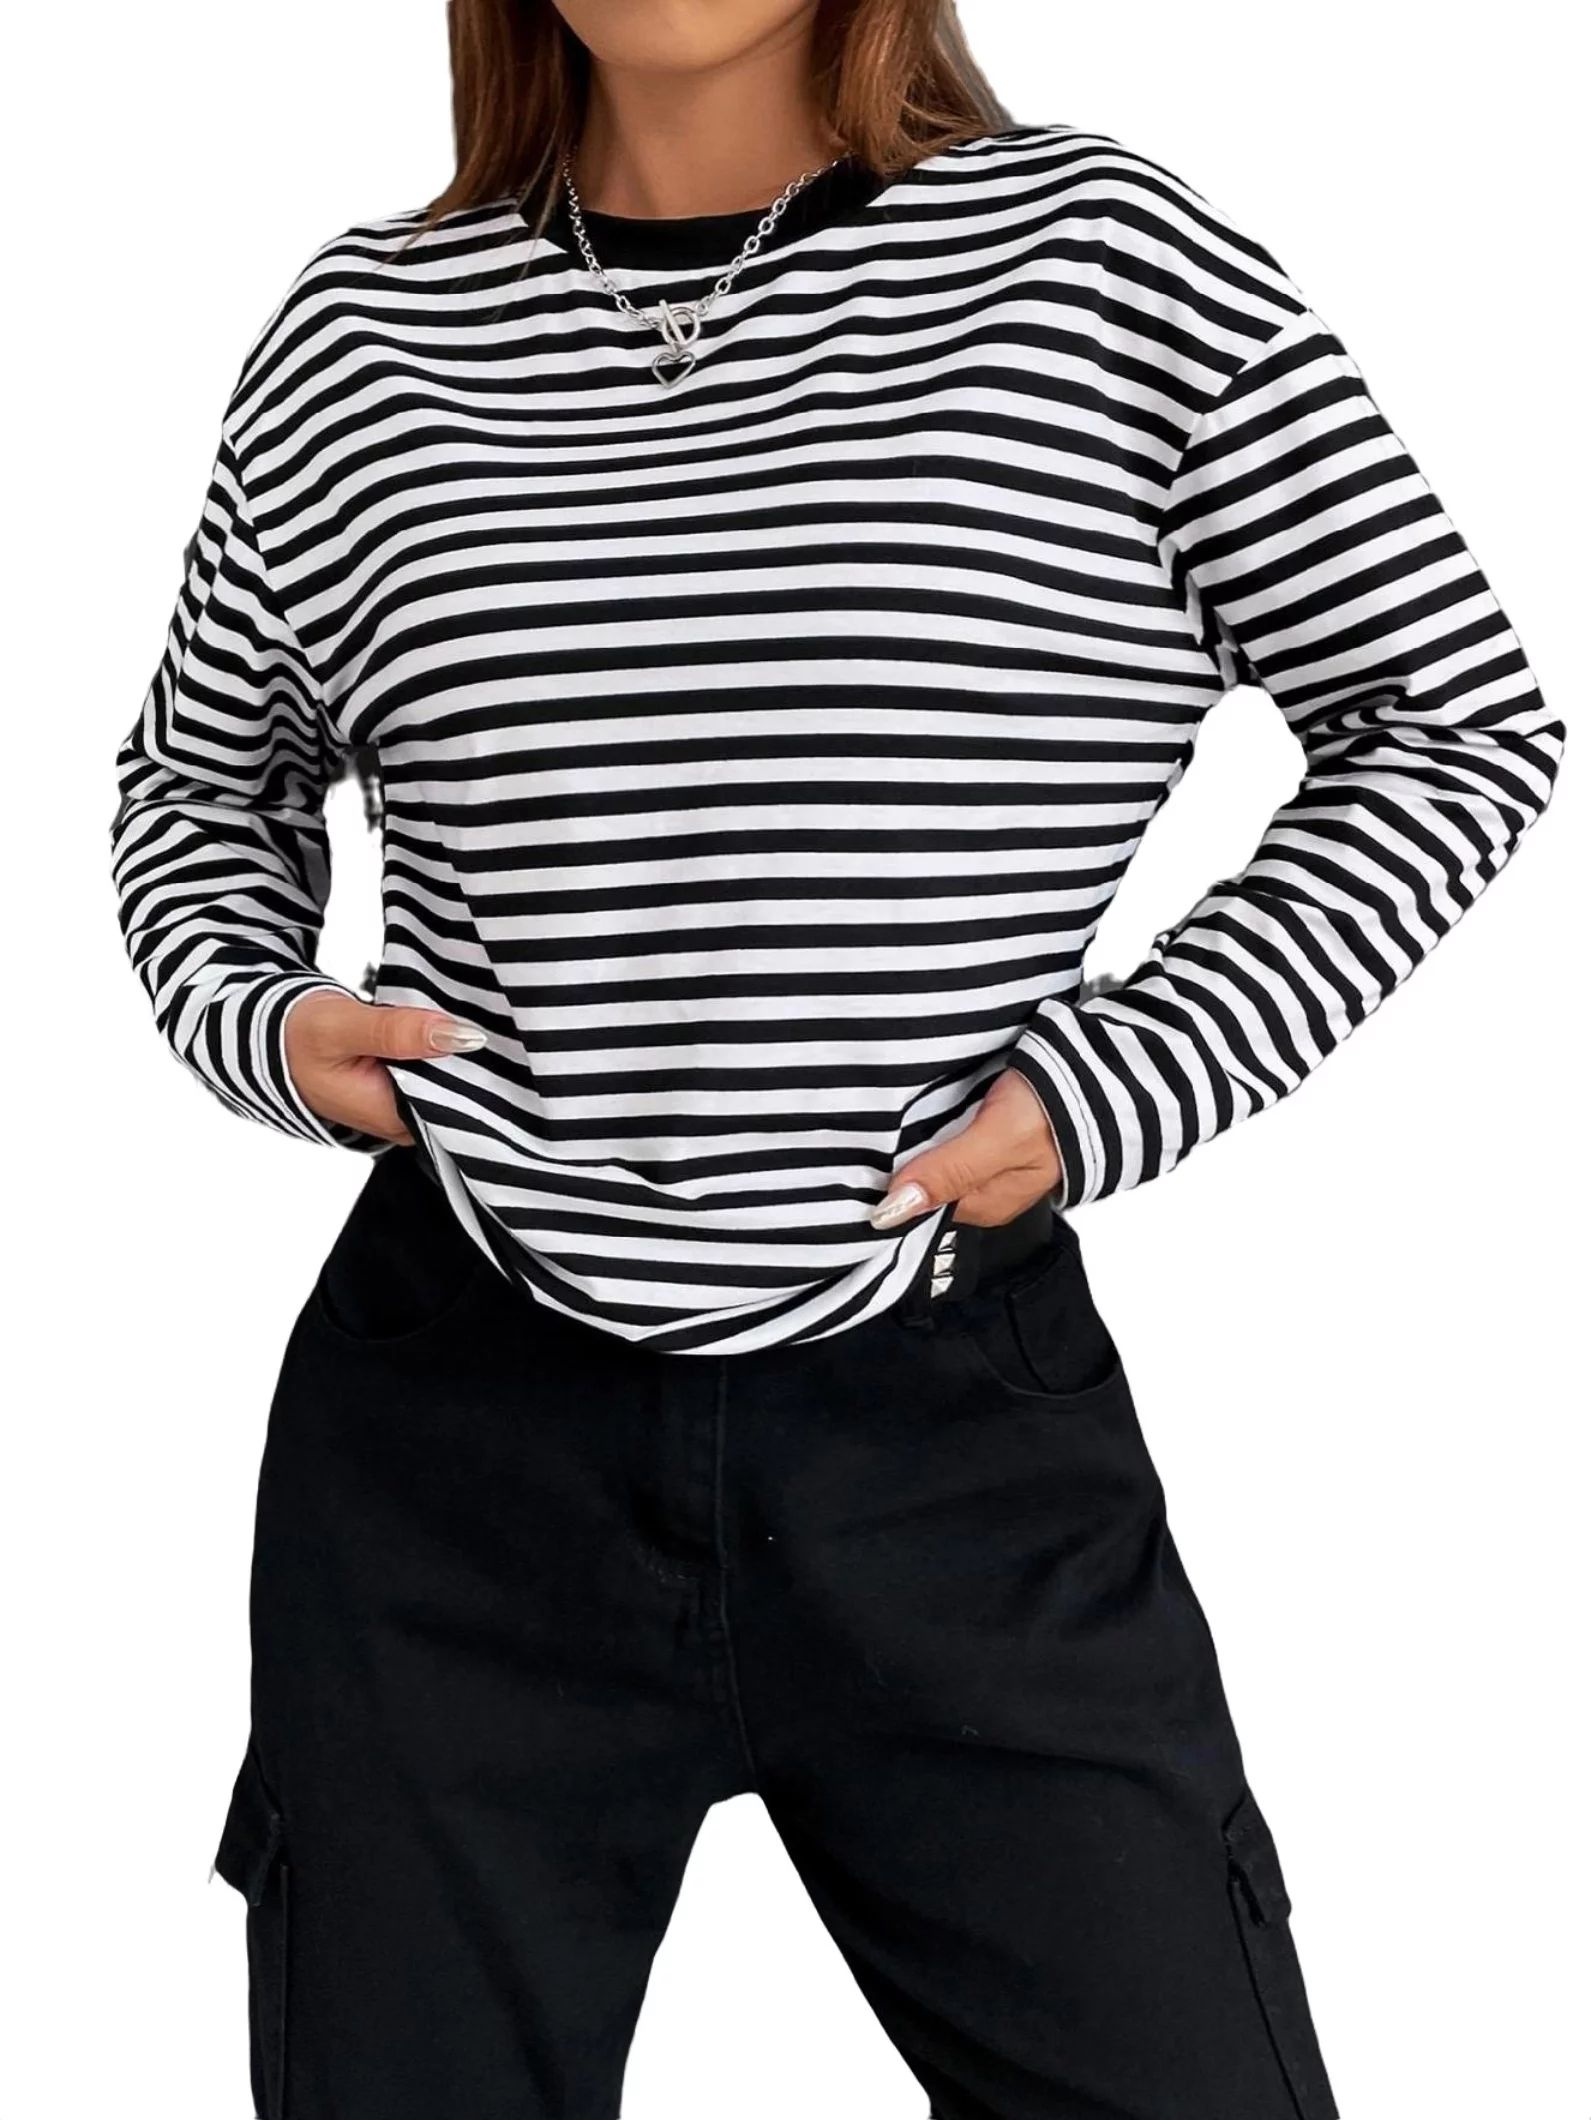 Women's Casual Striped Round Neck Long Sleeve Black and White T-Shirts L | Walmart (US)